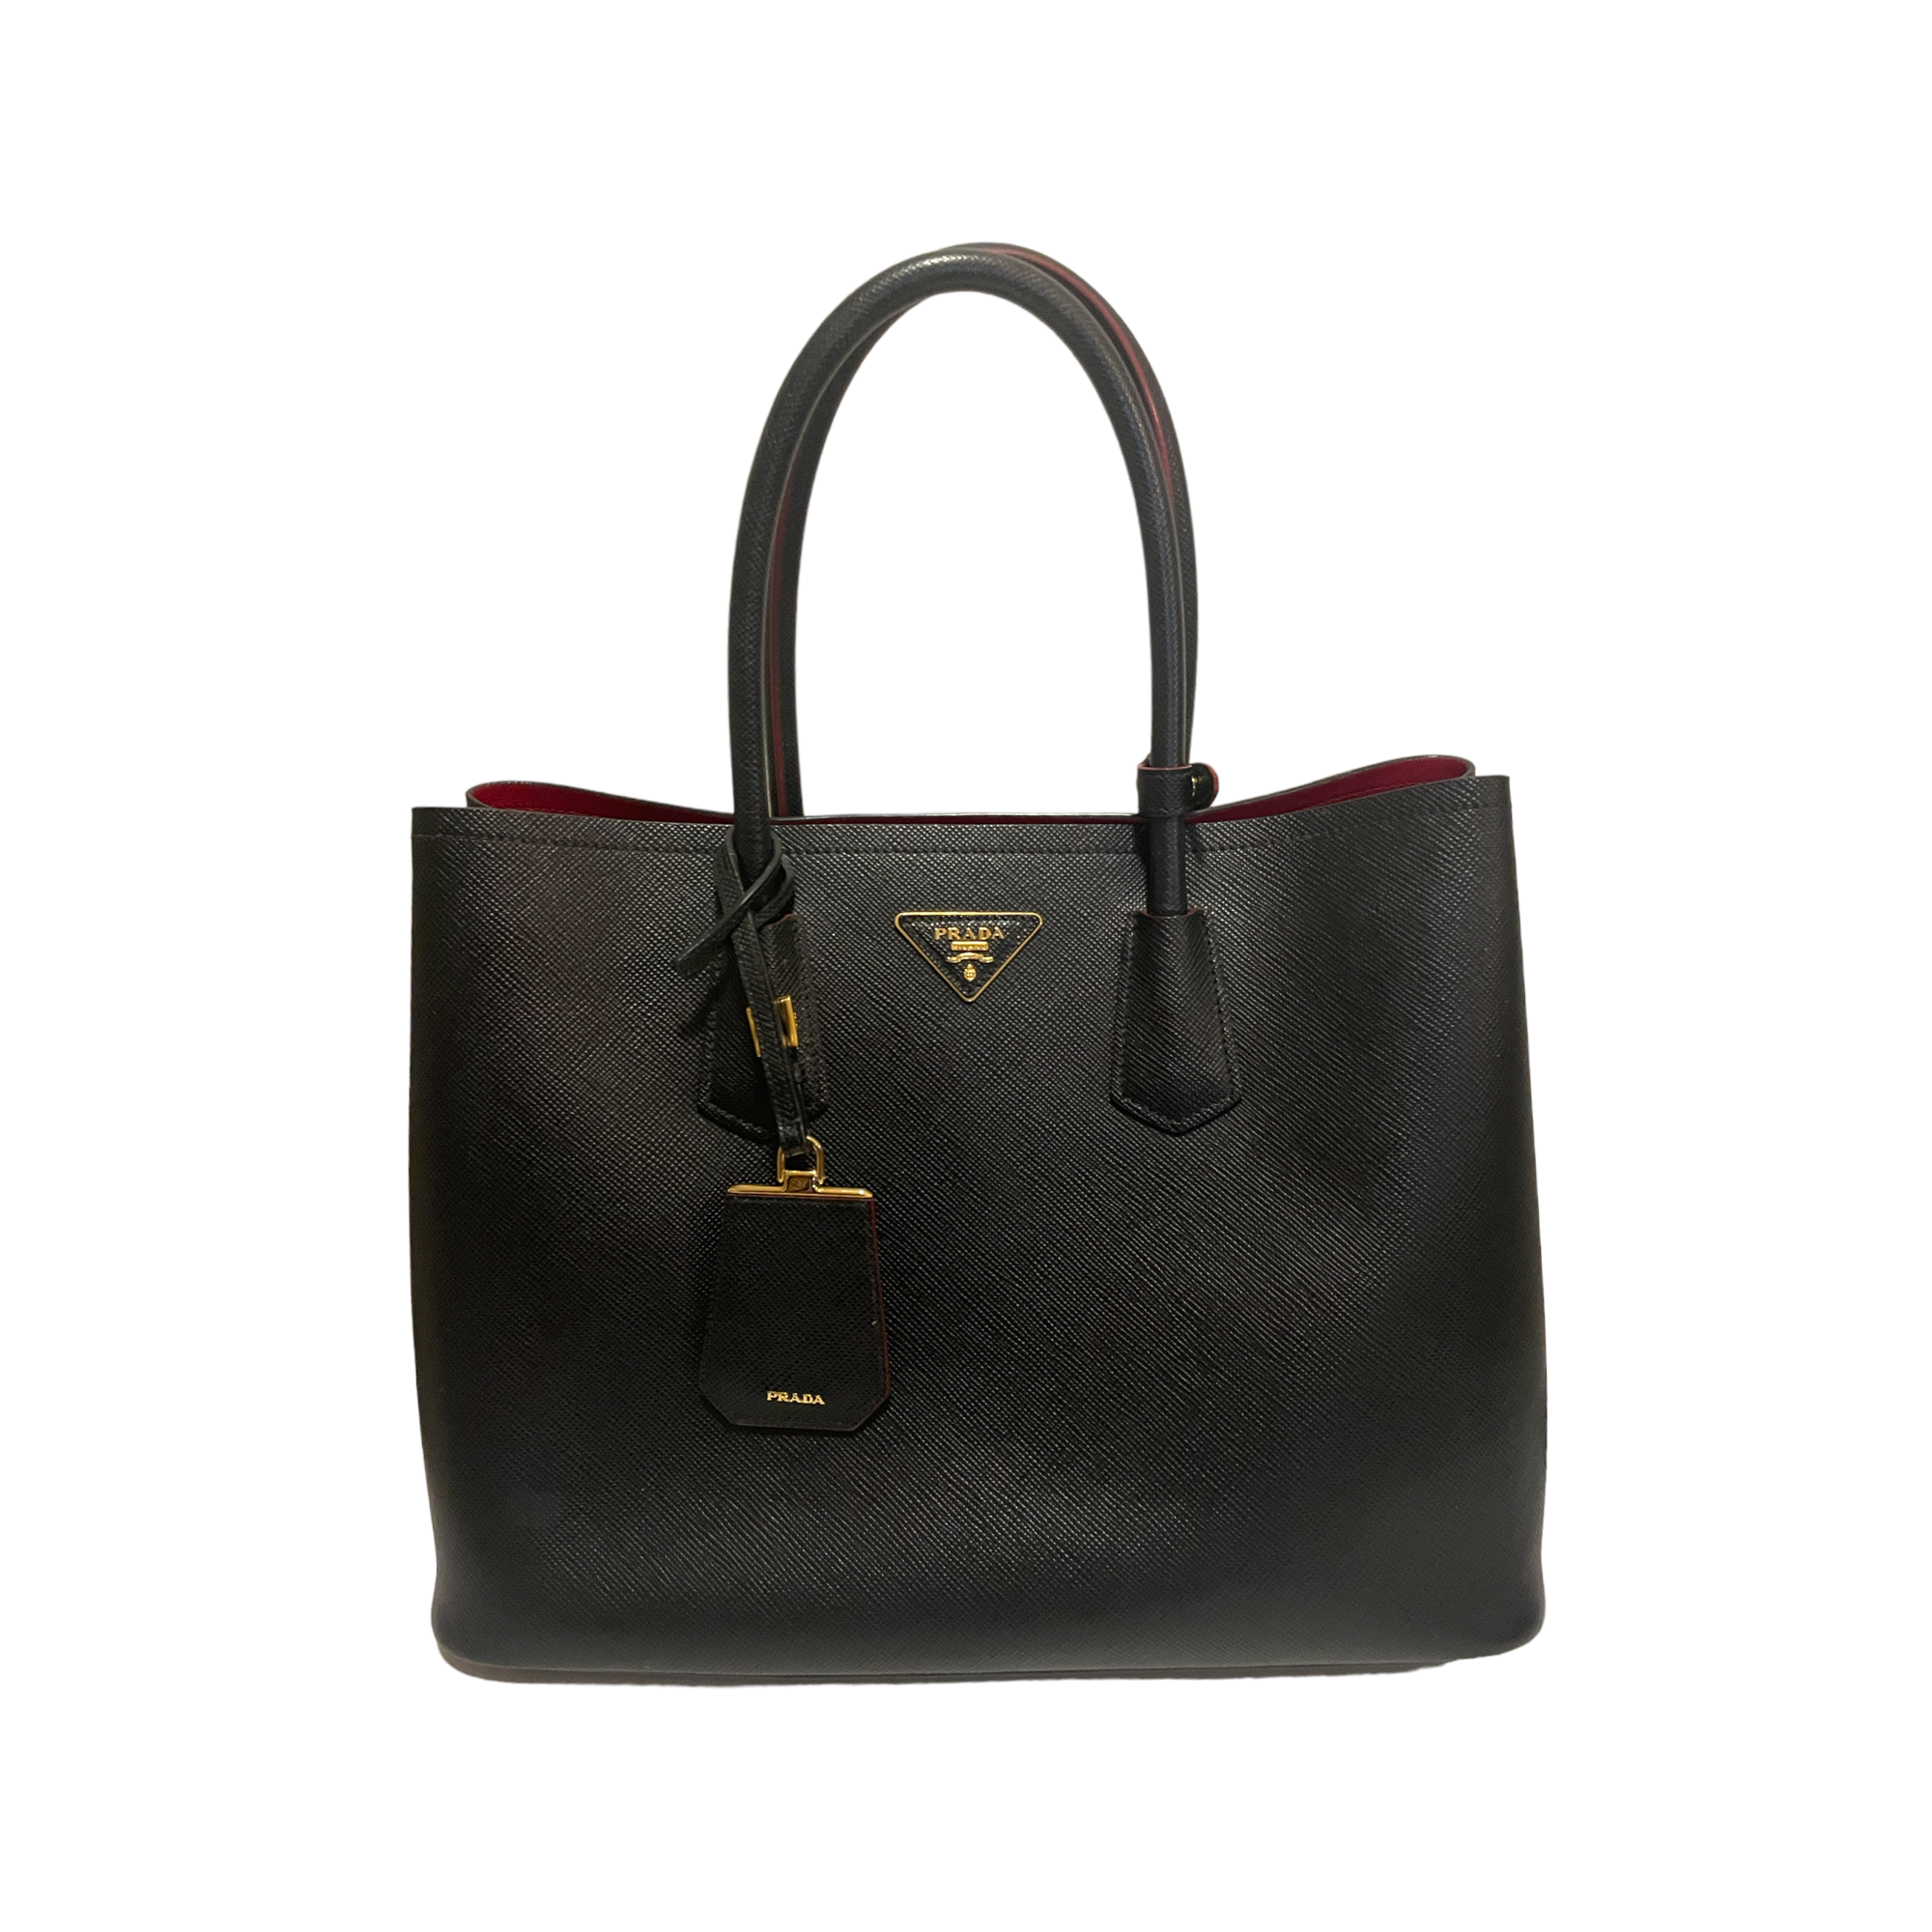 Black Fiery Red Saffiano Leather Double Prada Bag (SOLD OUT IN STORES)